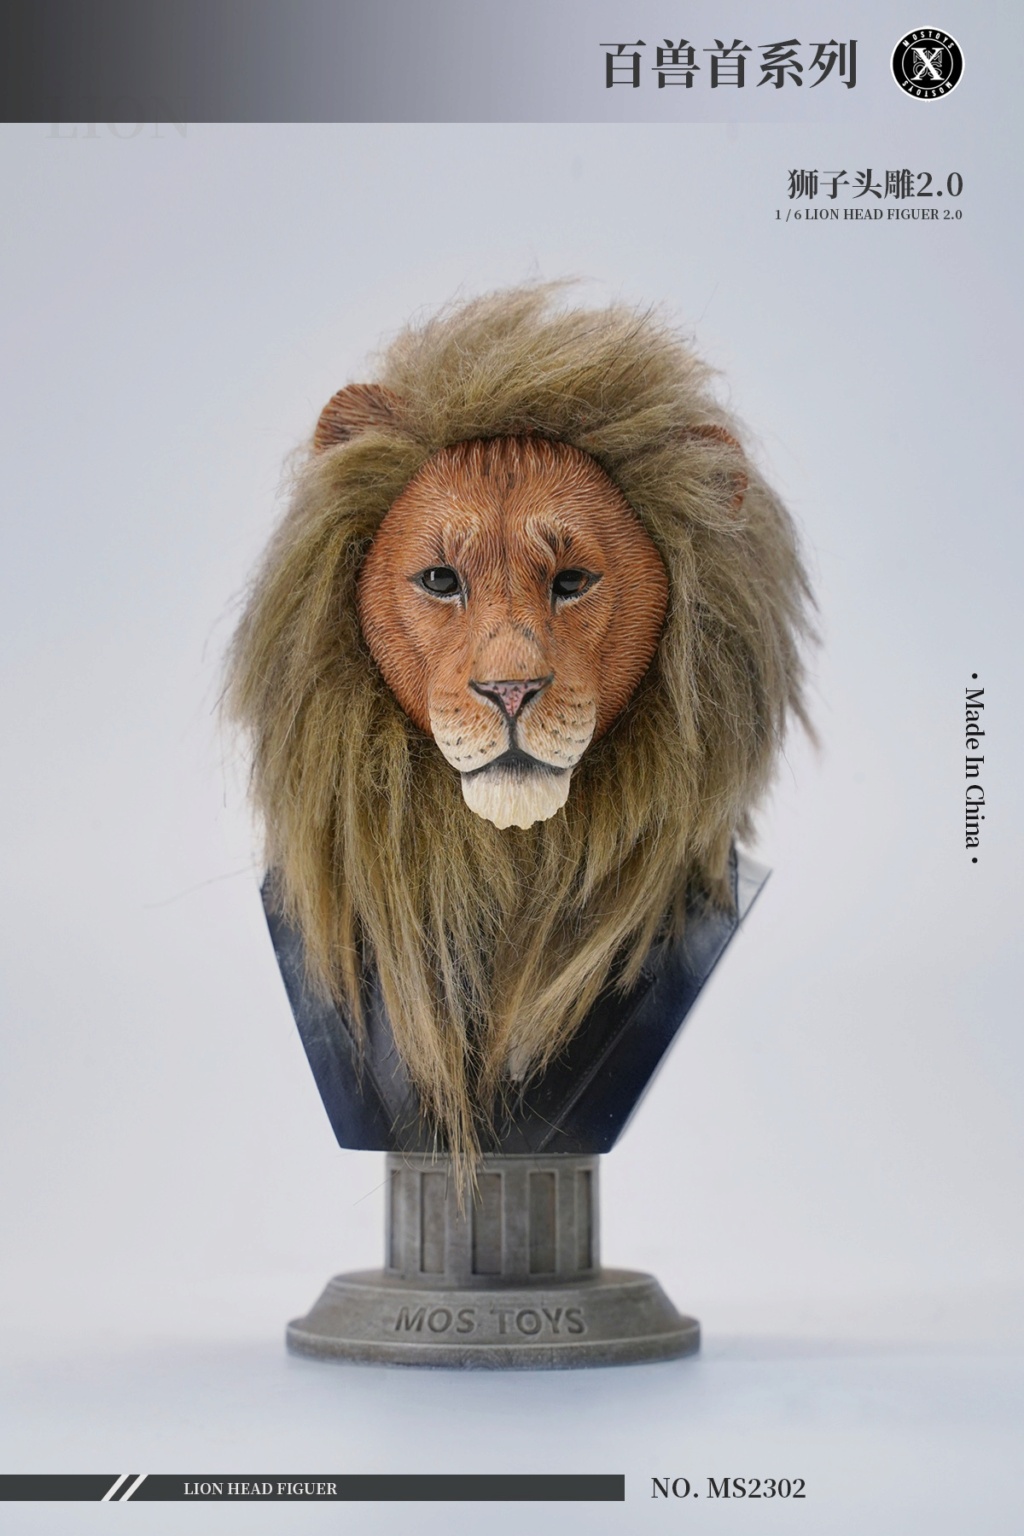 NEW PRODUCT: Mostoys: 1/6 MS2302 lion head sculpture 2.0 16234910